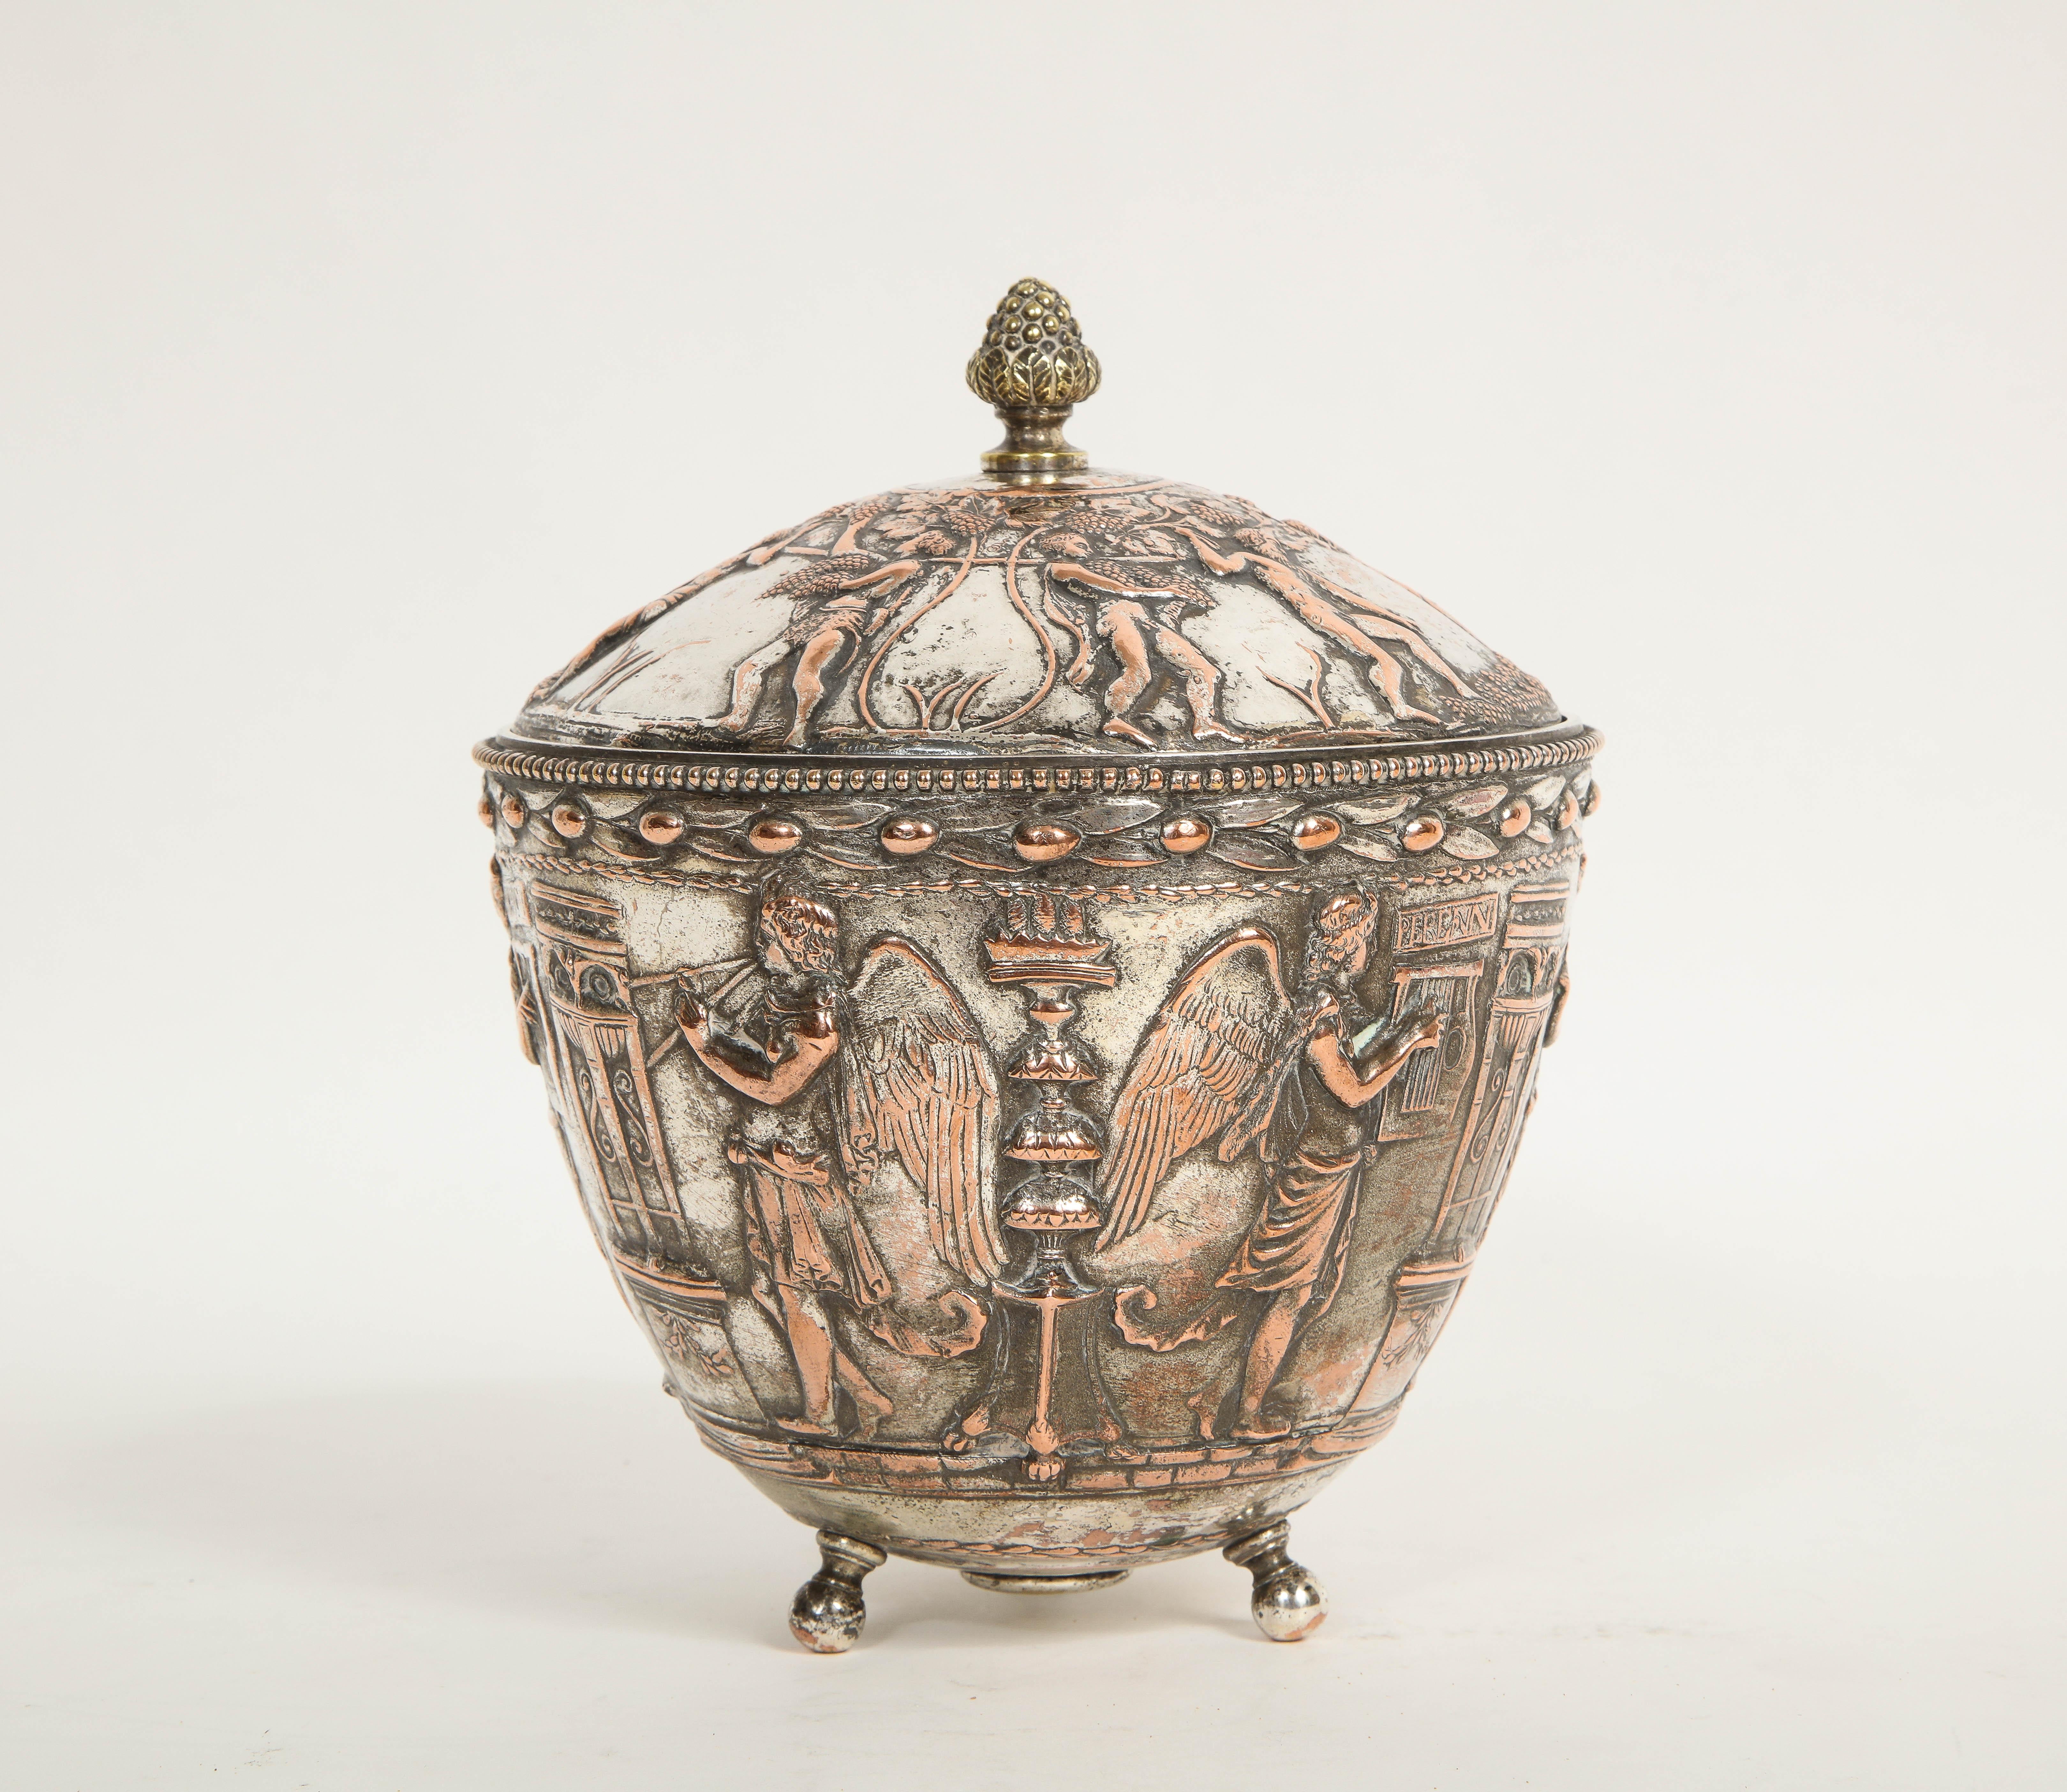 A Fantastic 19th Century silvered bronze neoclassical/archeological style covered bowl, Attributed to E.F Caldwell. The bowl and cover are each beautifully hand-chased and hand-chiseled. The bowl is decorated in neoclassical/archeological, Roman